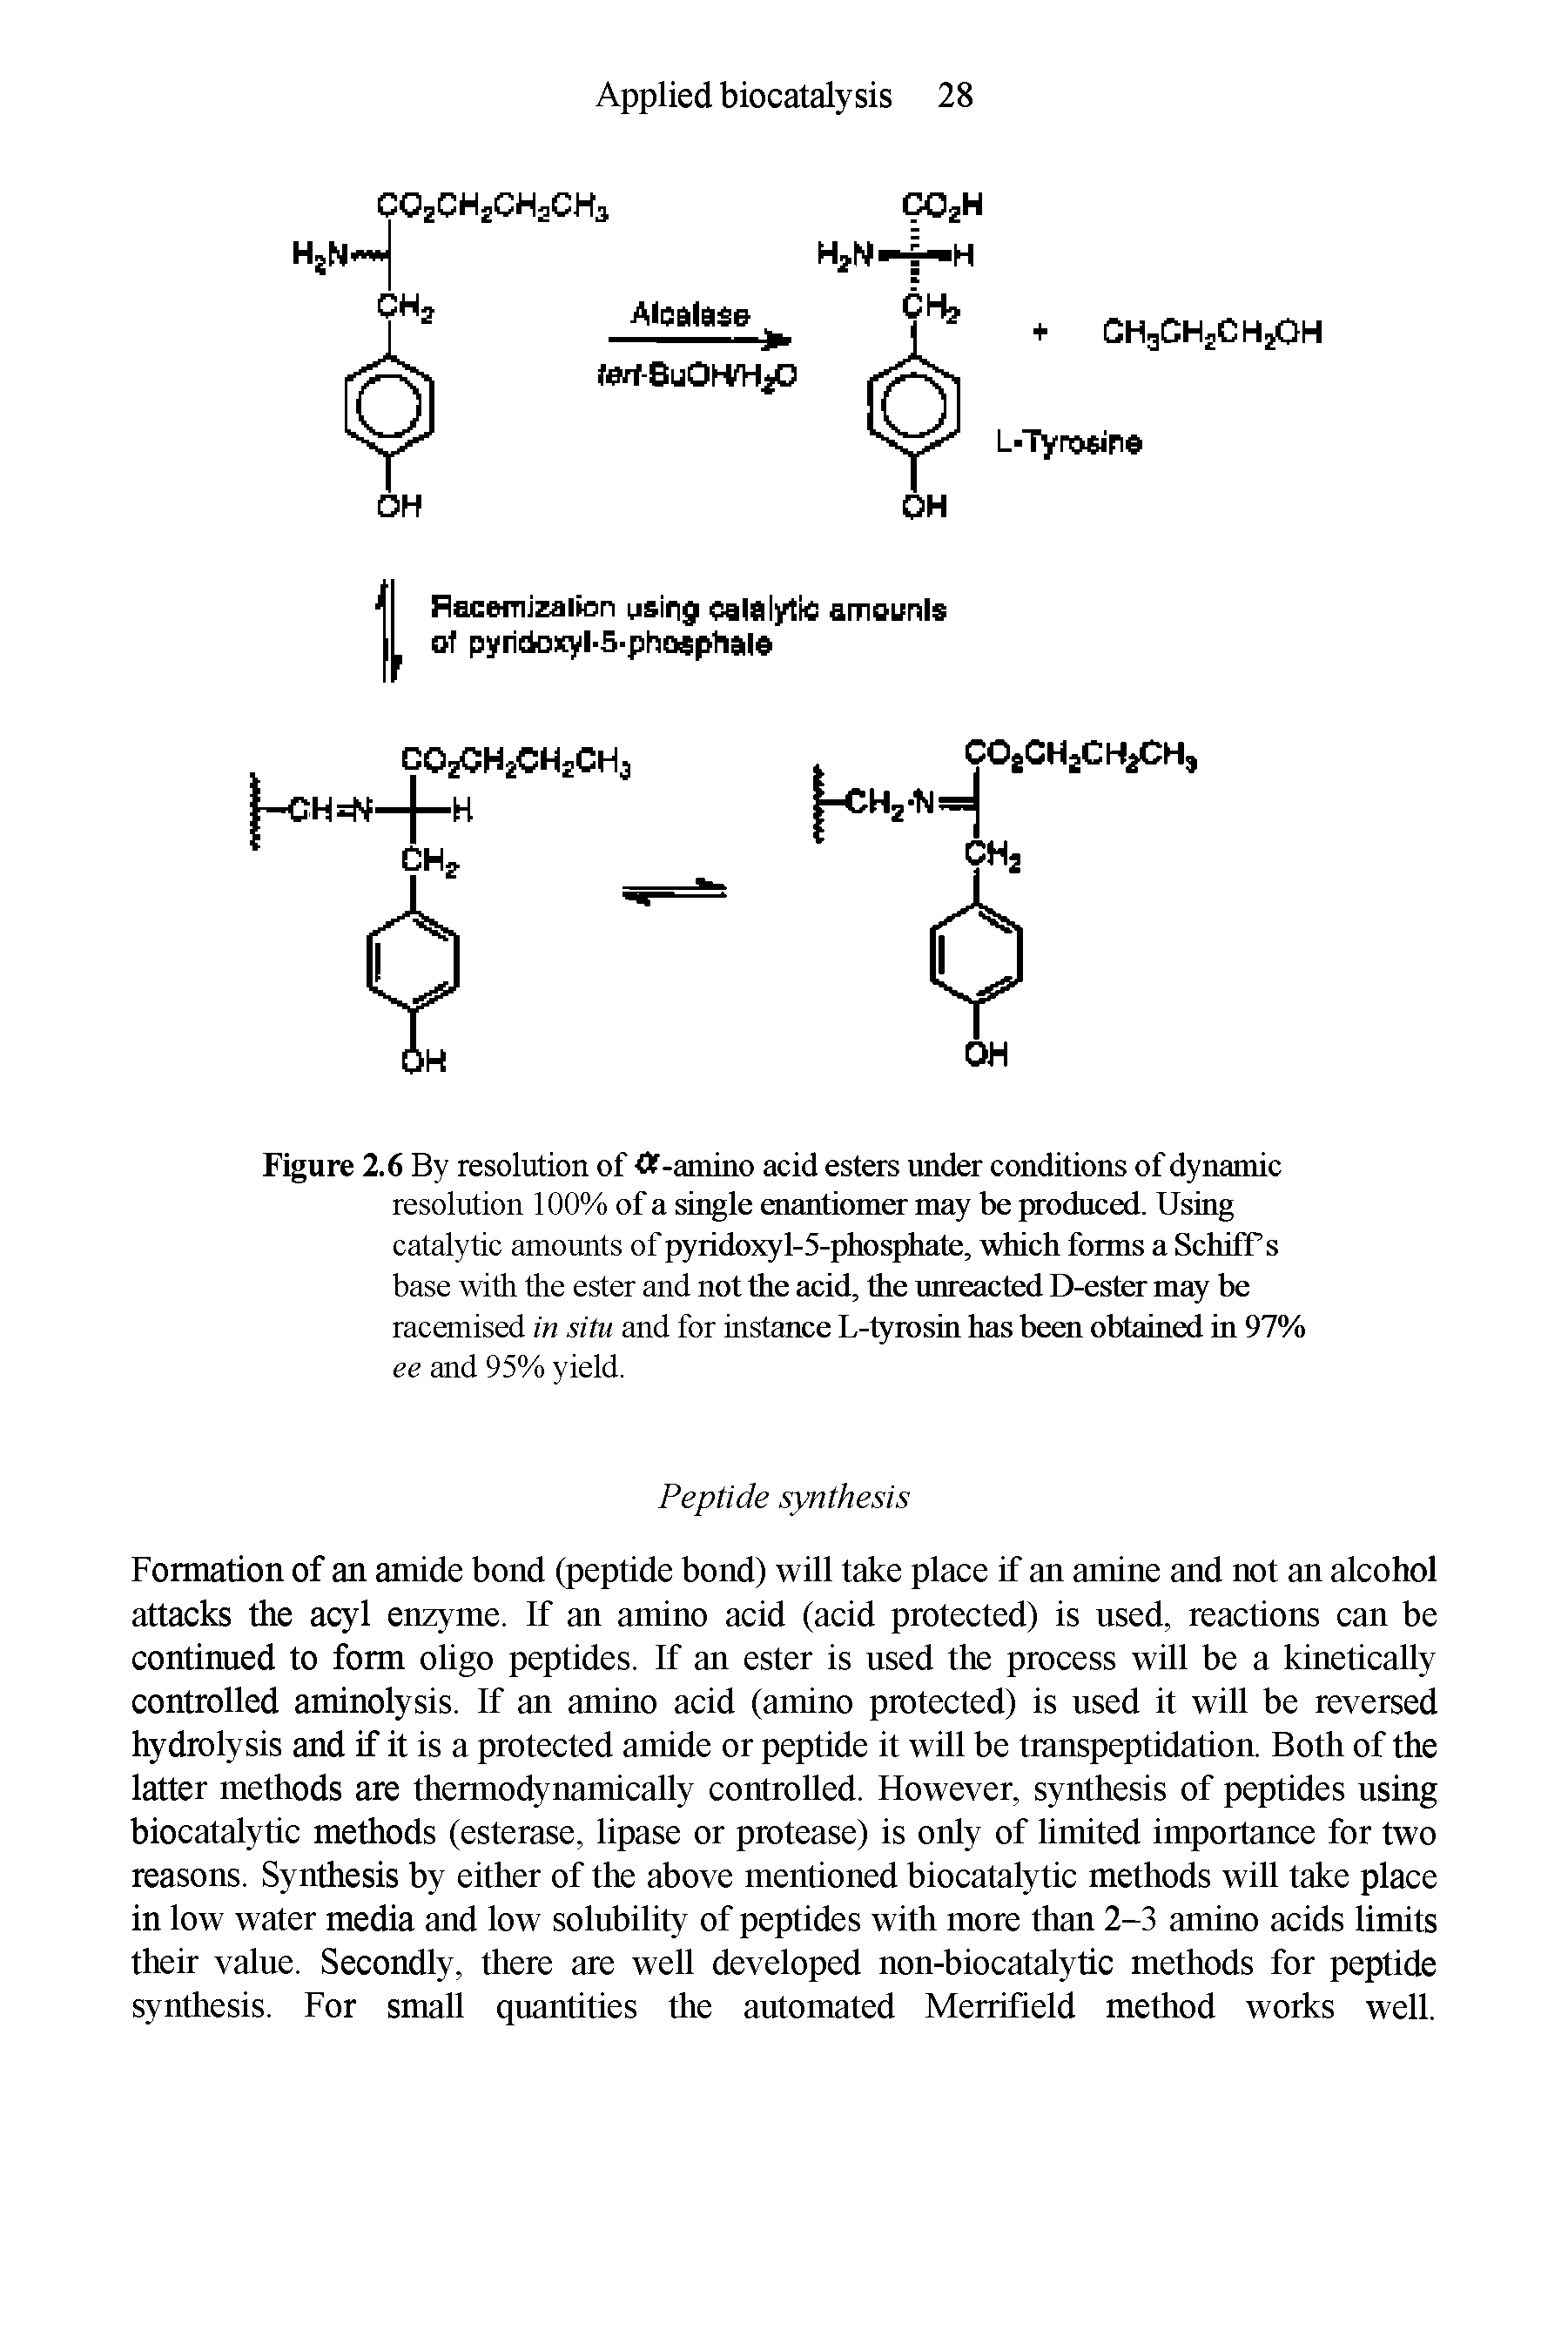 Figure 2.6 By resolution of df-amino acid esters under conditions of dynamic resolution 100% of a single enantiomer may be produced. Using catalytic amounts of pyiidoxyl-5-phosphate, which forms a Schiff s base with the ester and not the acid, the unreacted D-ester may be racemised in situ and for instance L-tyrosin has been obtained in 97% ee and 95% yield.